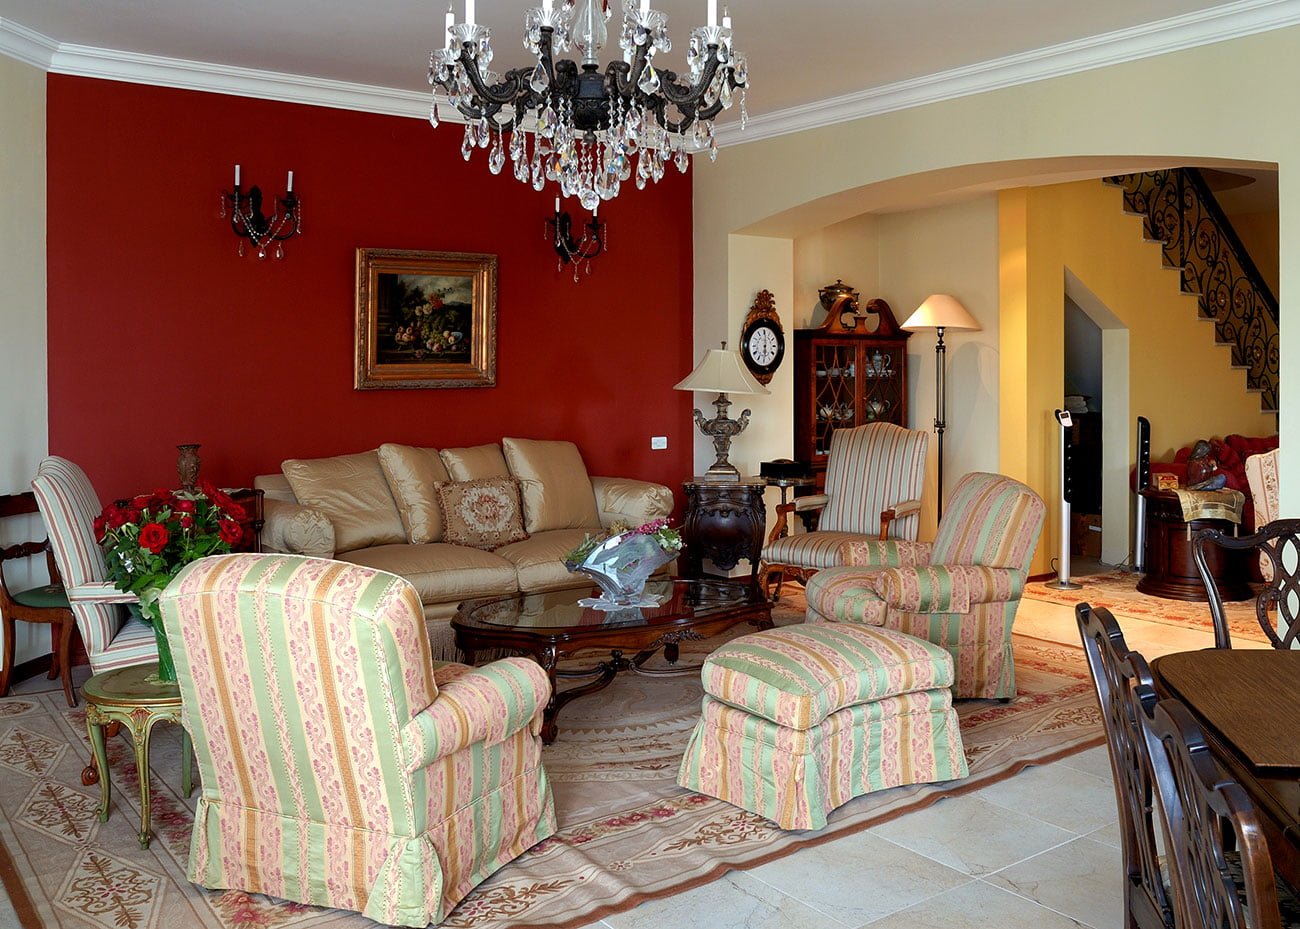 photo of the living room area highlighted and outlined with an antique carpet with furniture and bedside tables